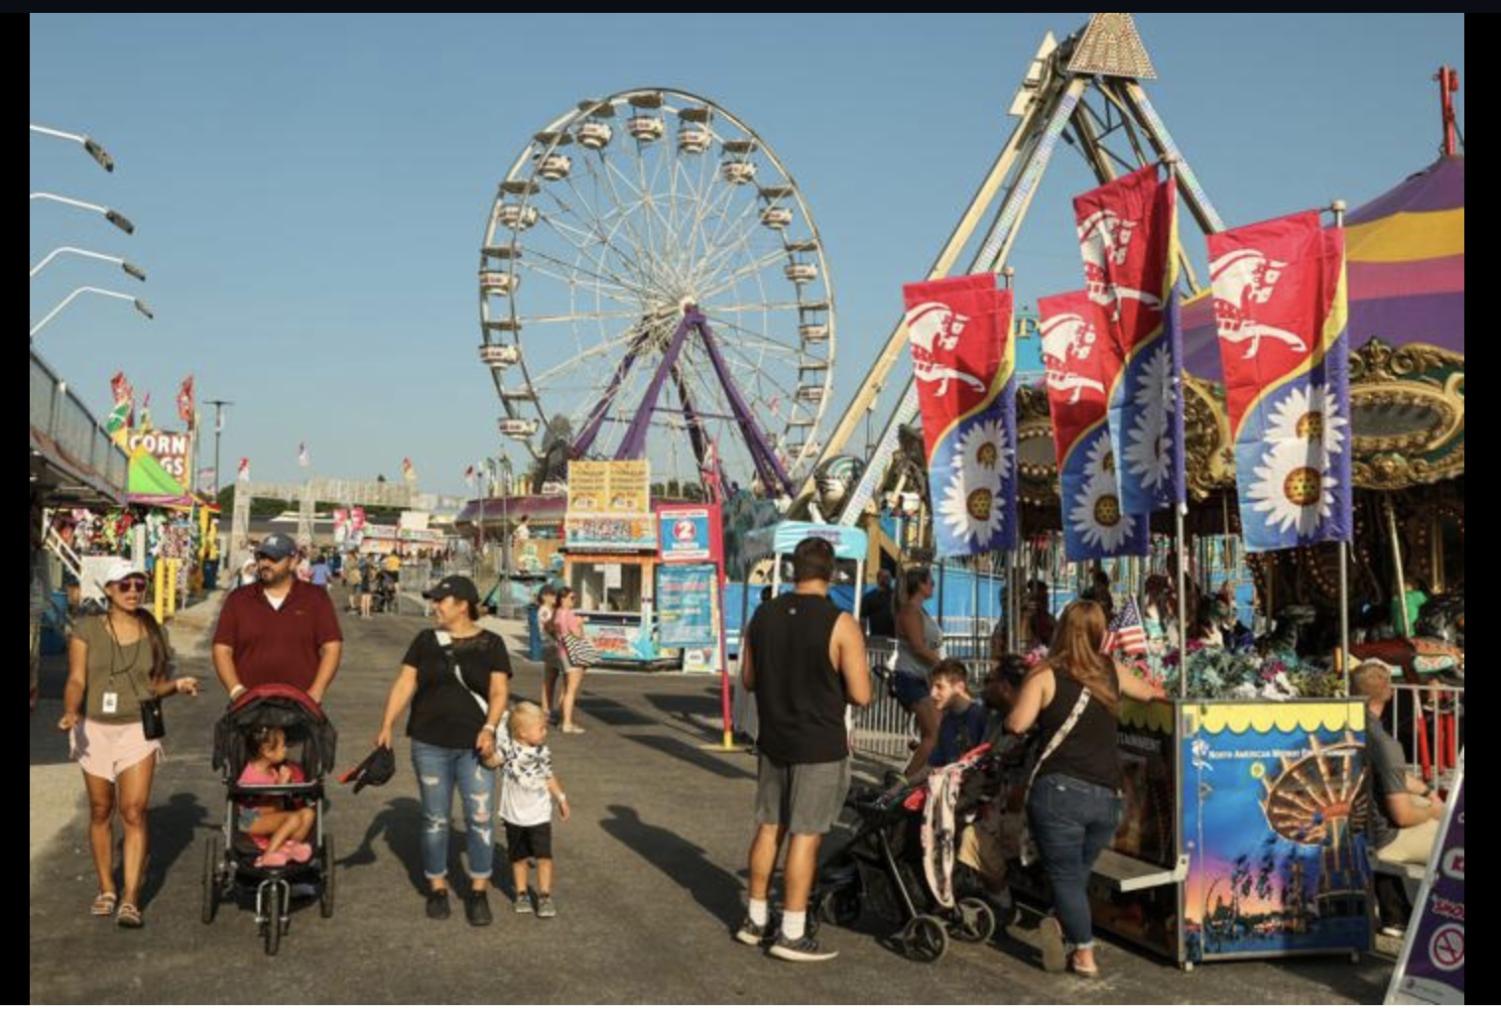 Crown Point Lake County Fair. The Lake County Fair festival will be held August 5th-August 14th in Crown Point. Visitors can experience a variety of entertainment from carnival rides, games, food vendors and motor sport events. (John J. Watkins/The Times). 